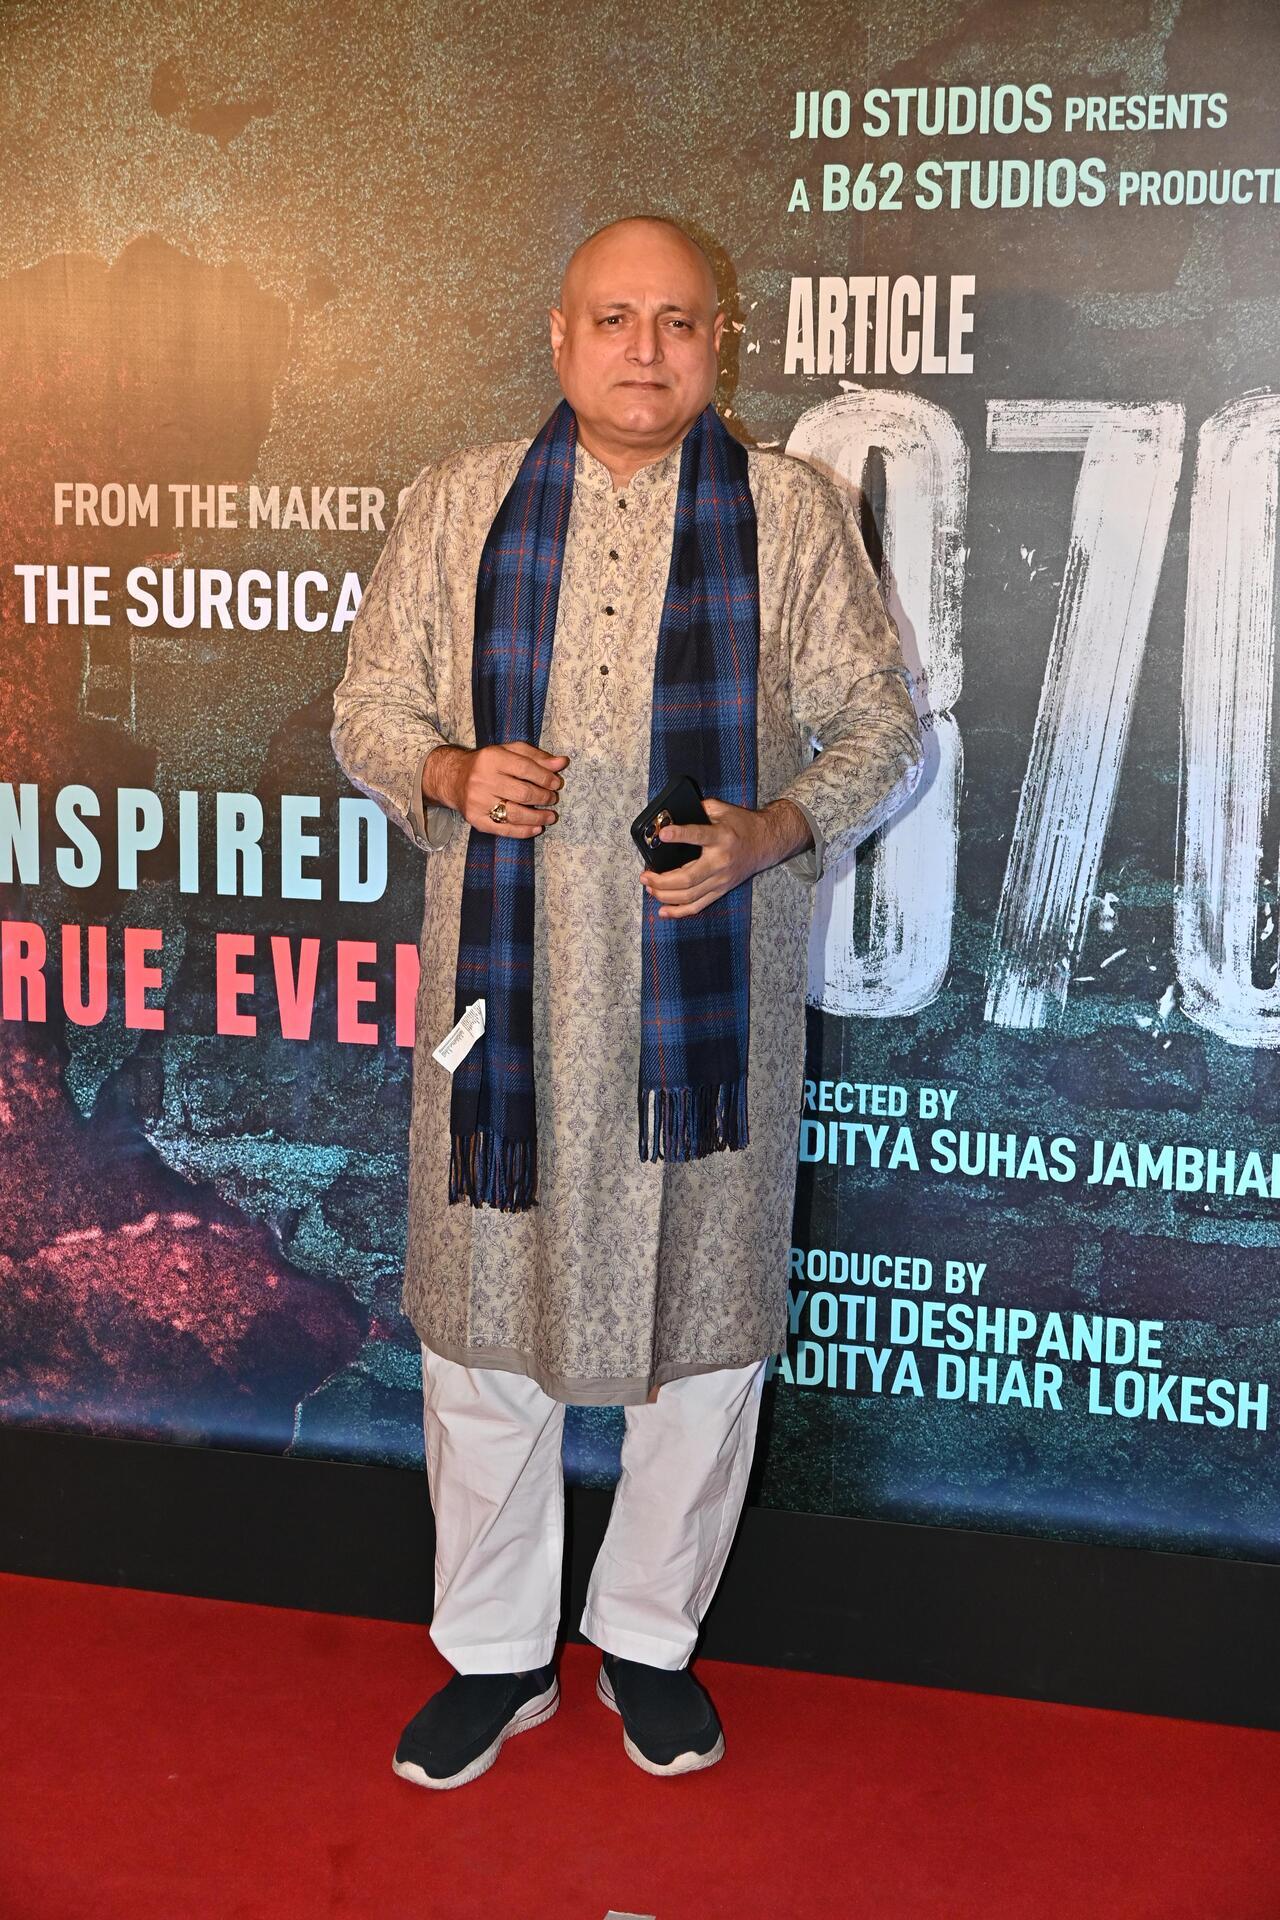 Actor Manoj Joshi was seen in a traditional outfit for the screening